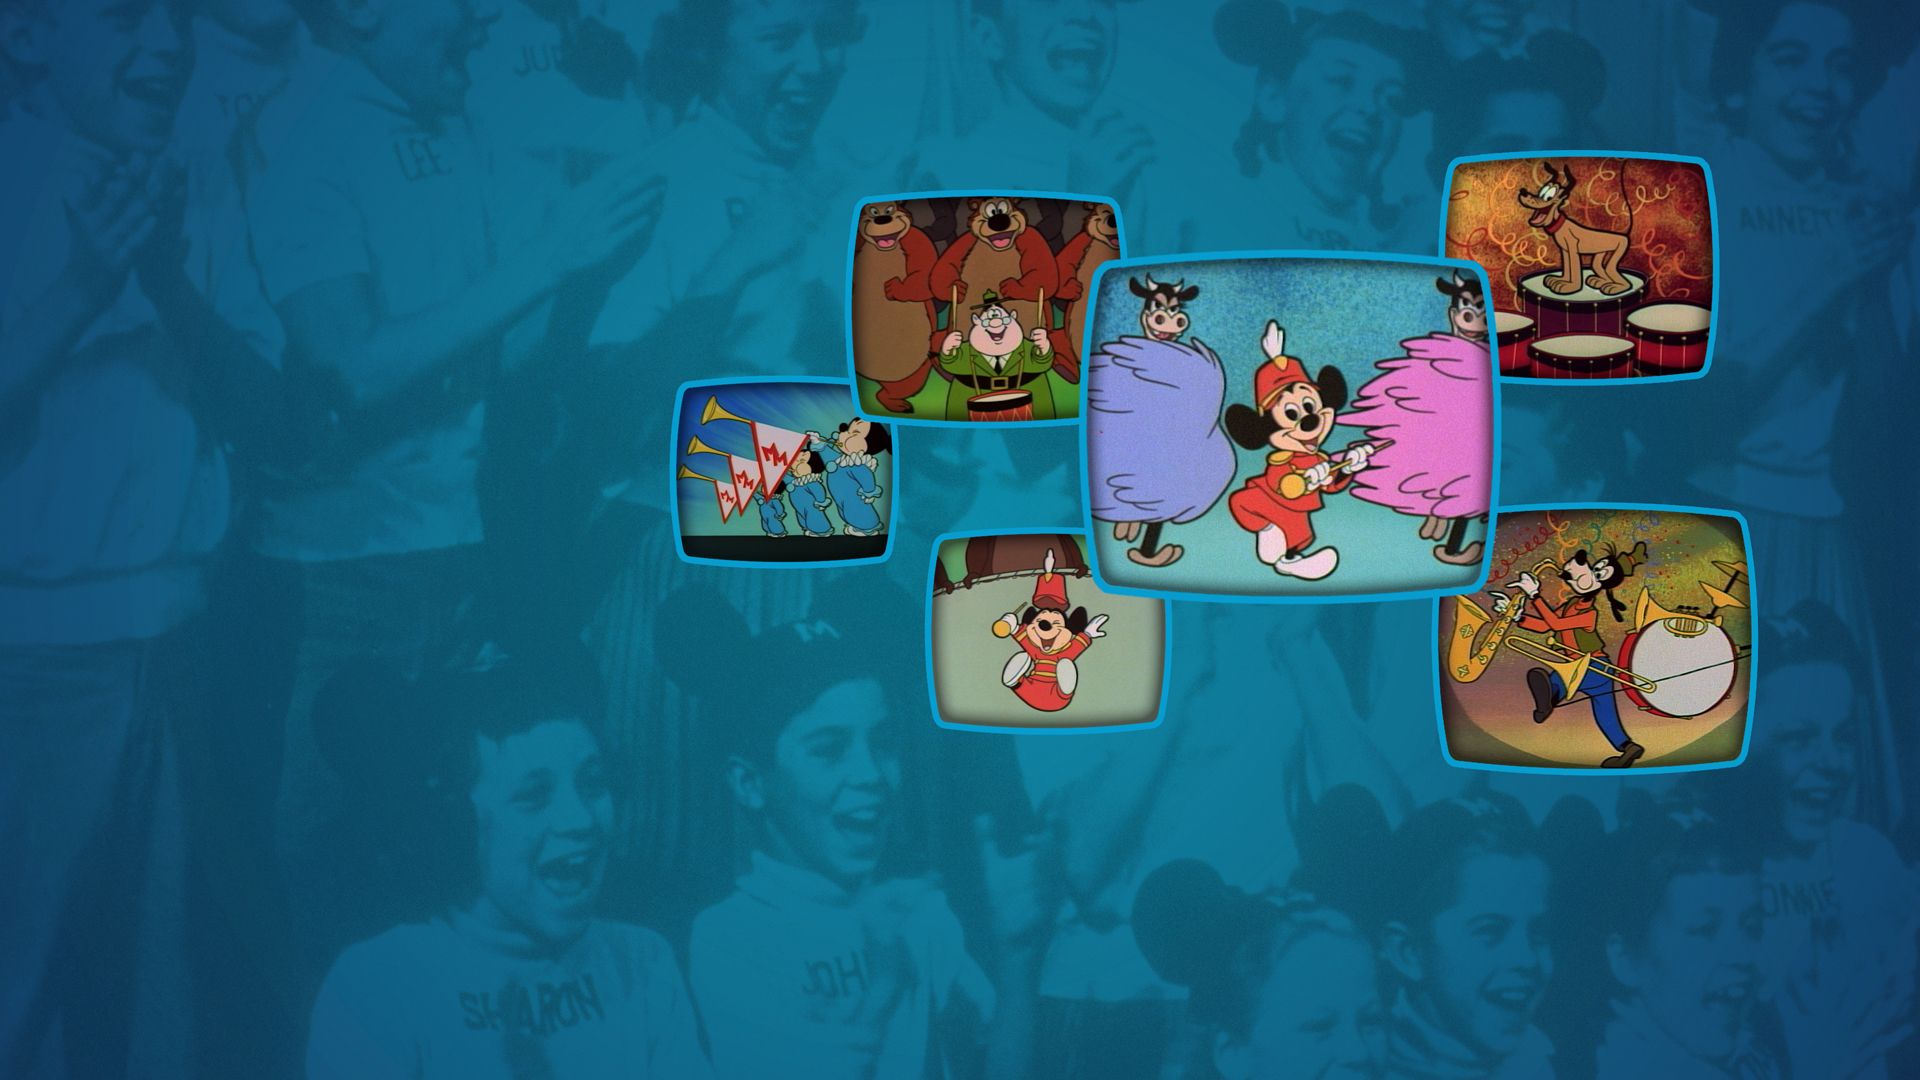 The Mickey Mouse Club background